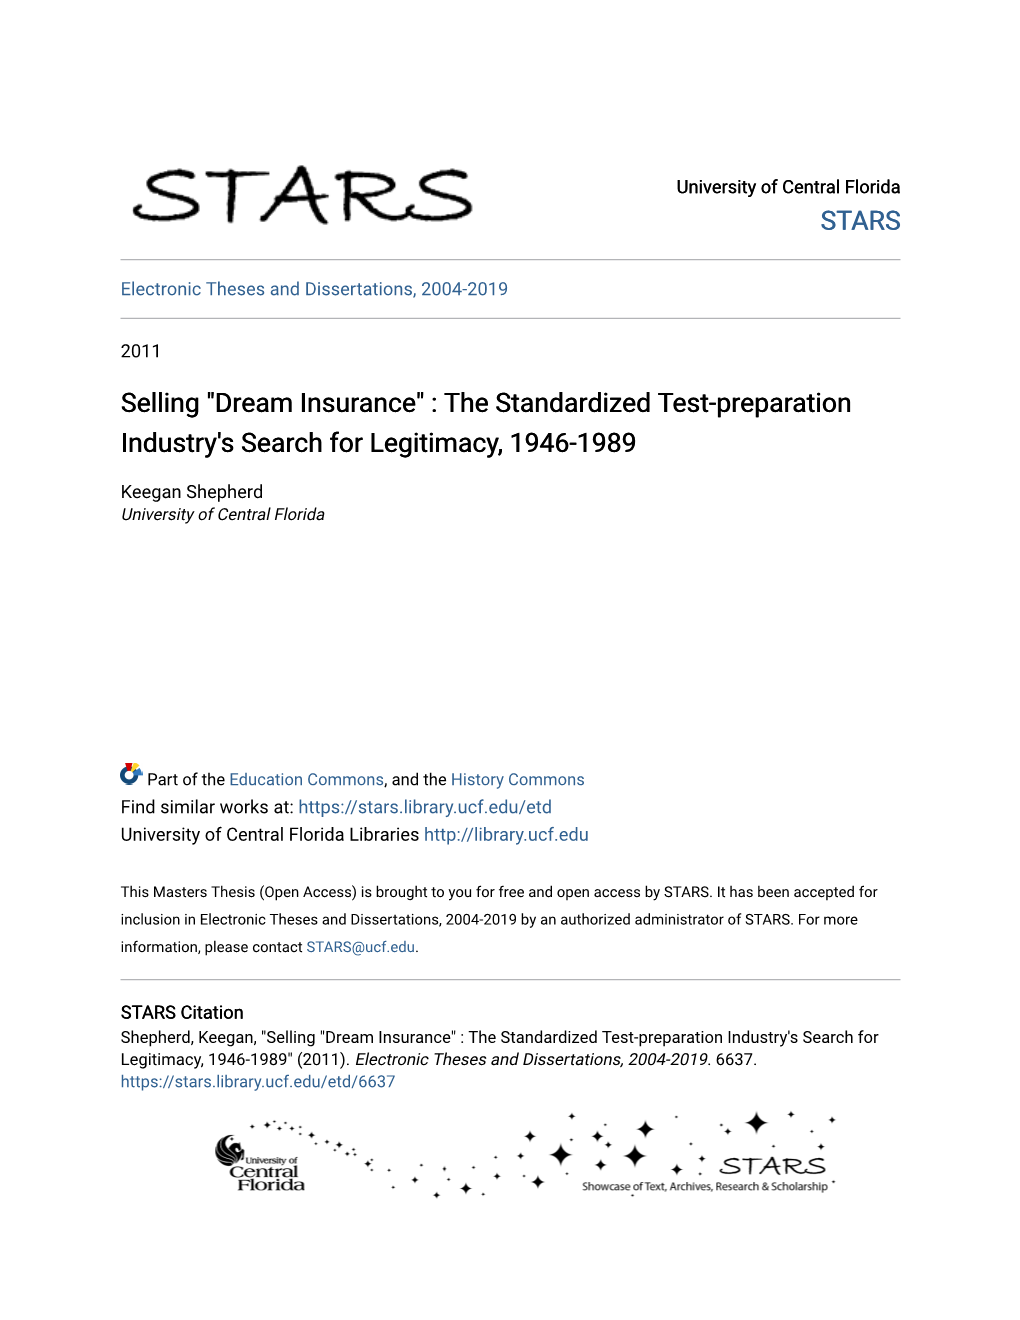 The Standardized Test-Preparation Industry's Search for Legitimacy, 1946-1989